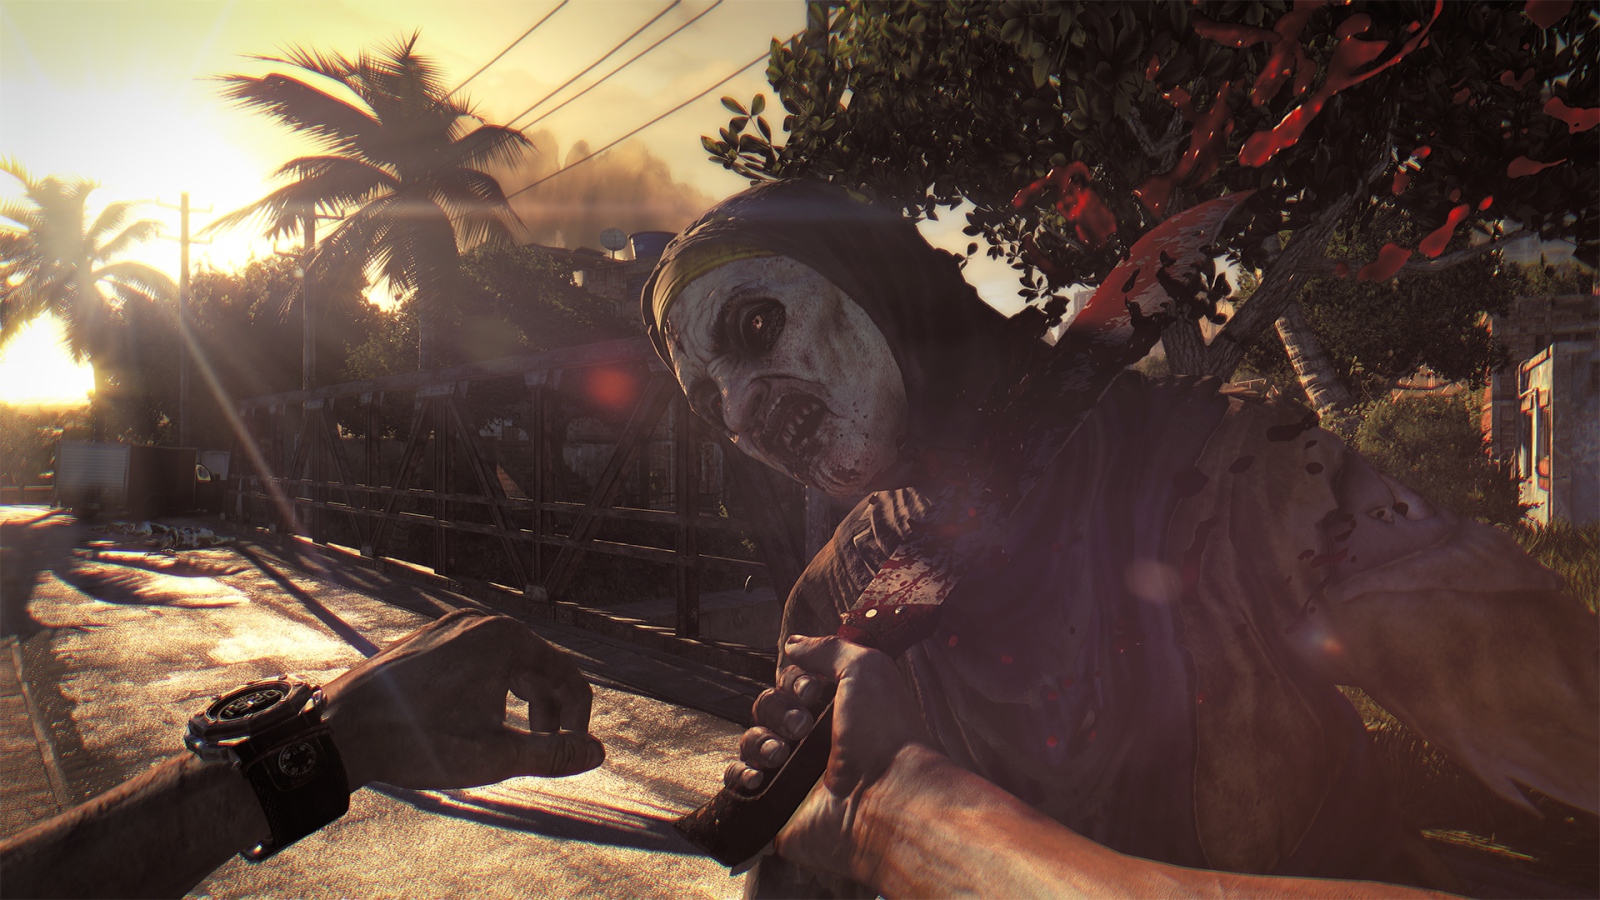 Zombies in the game Dying Light